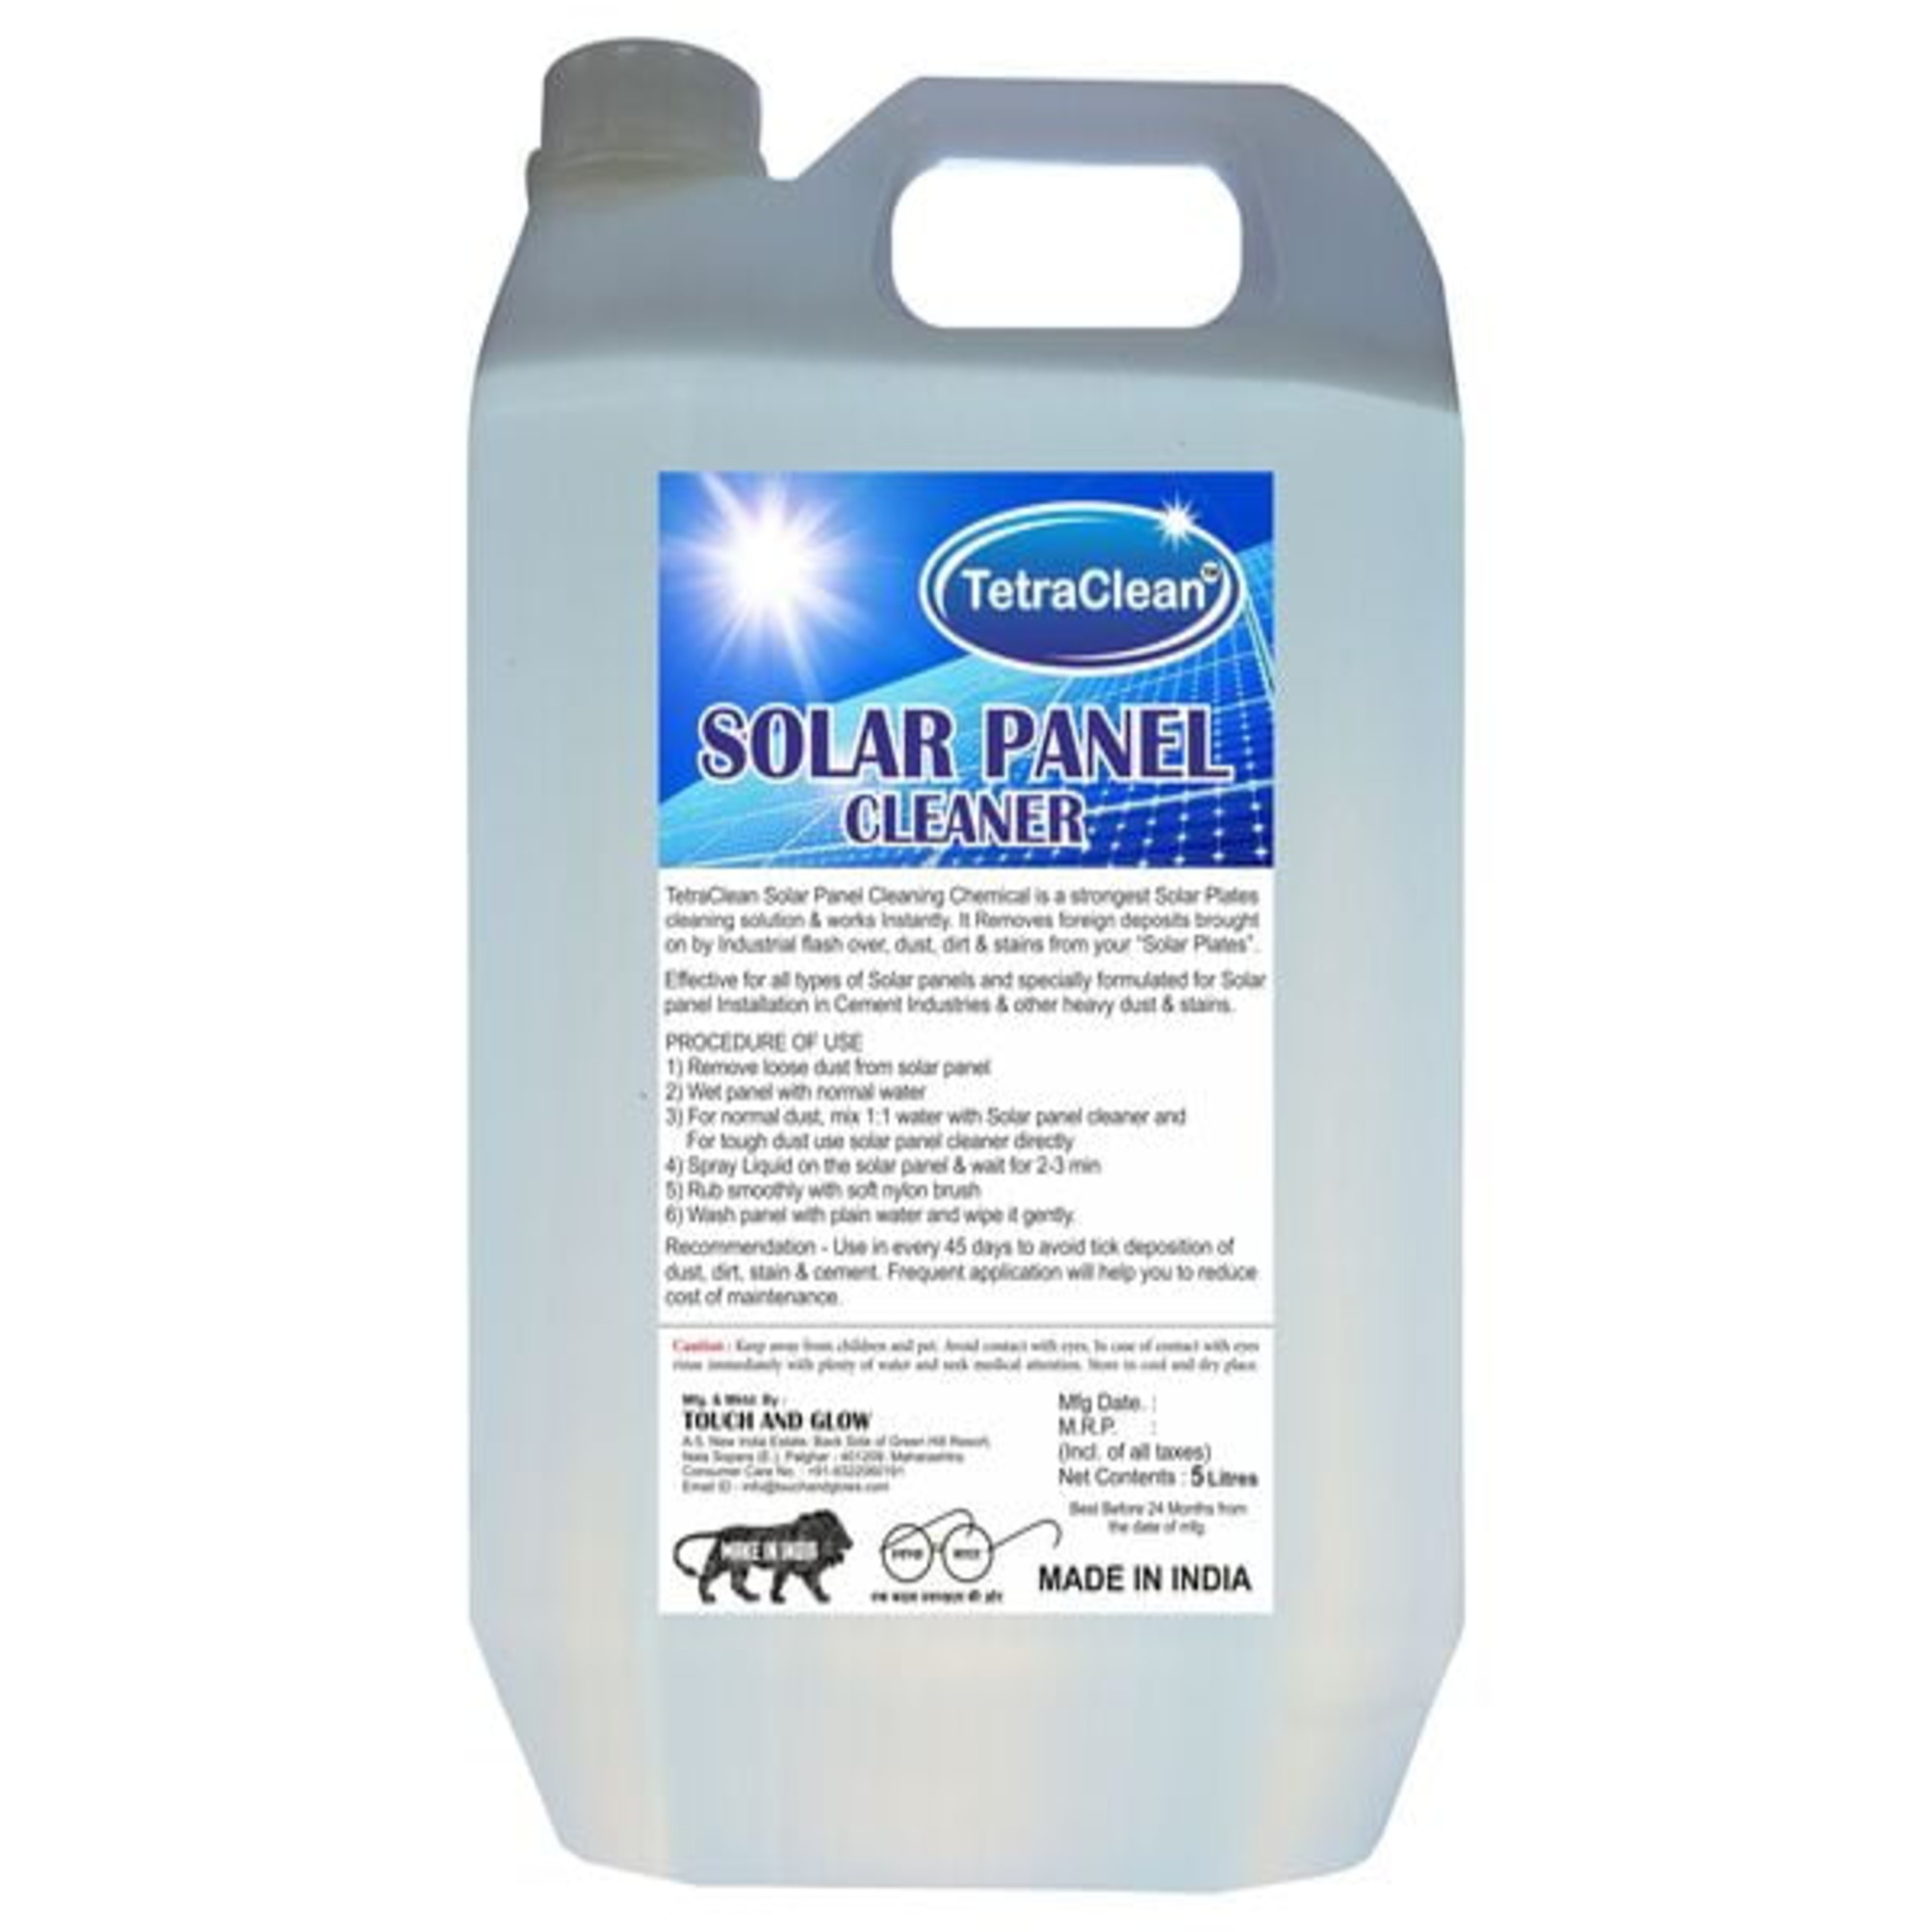 TetraClean Heavy Duty Solar Panel Cleaner and Stain Remover (5L)